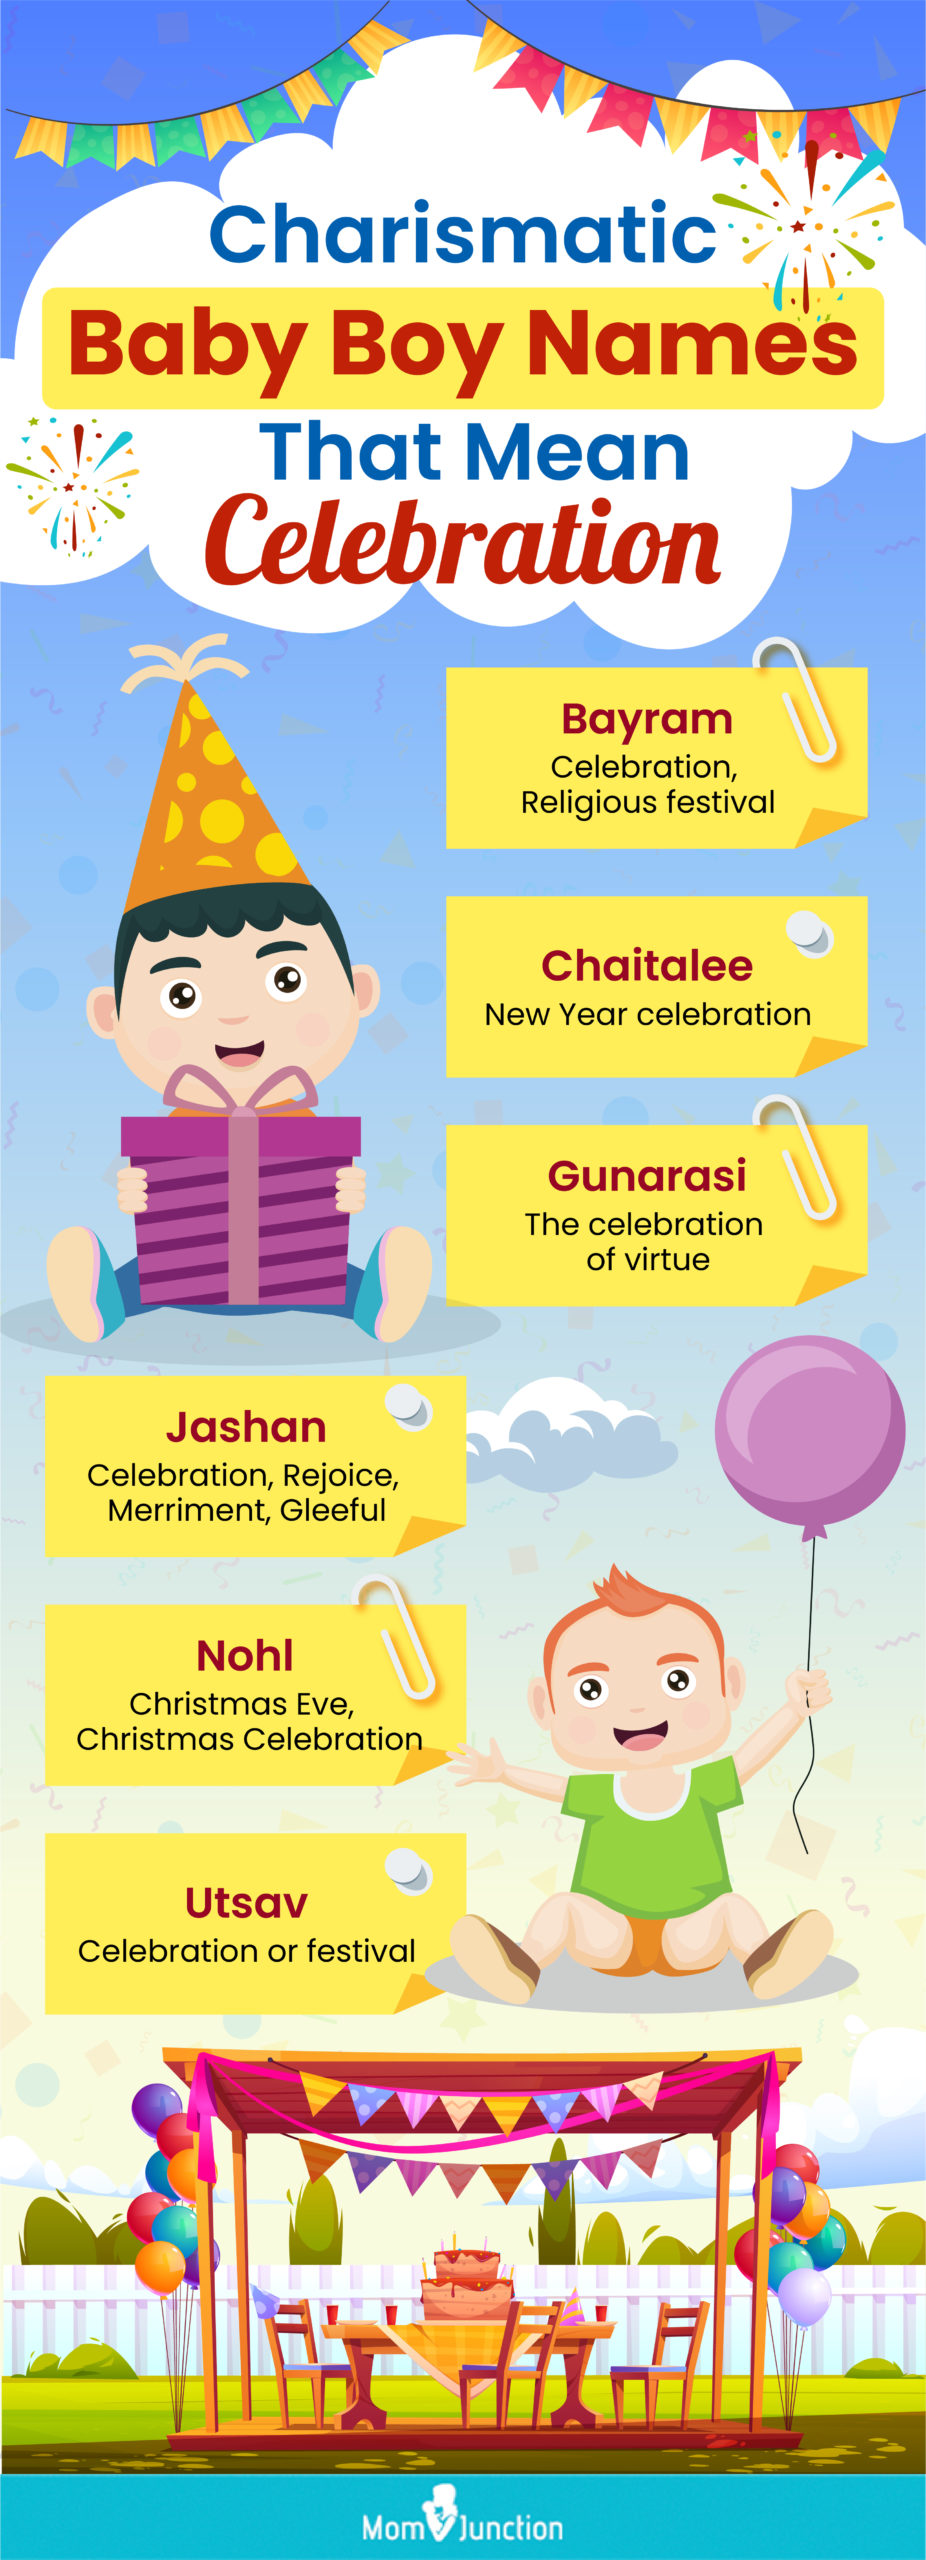 charismatic baby boy names that mean celebration (infographic)